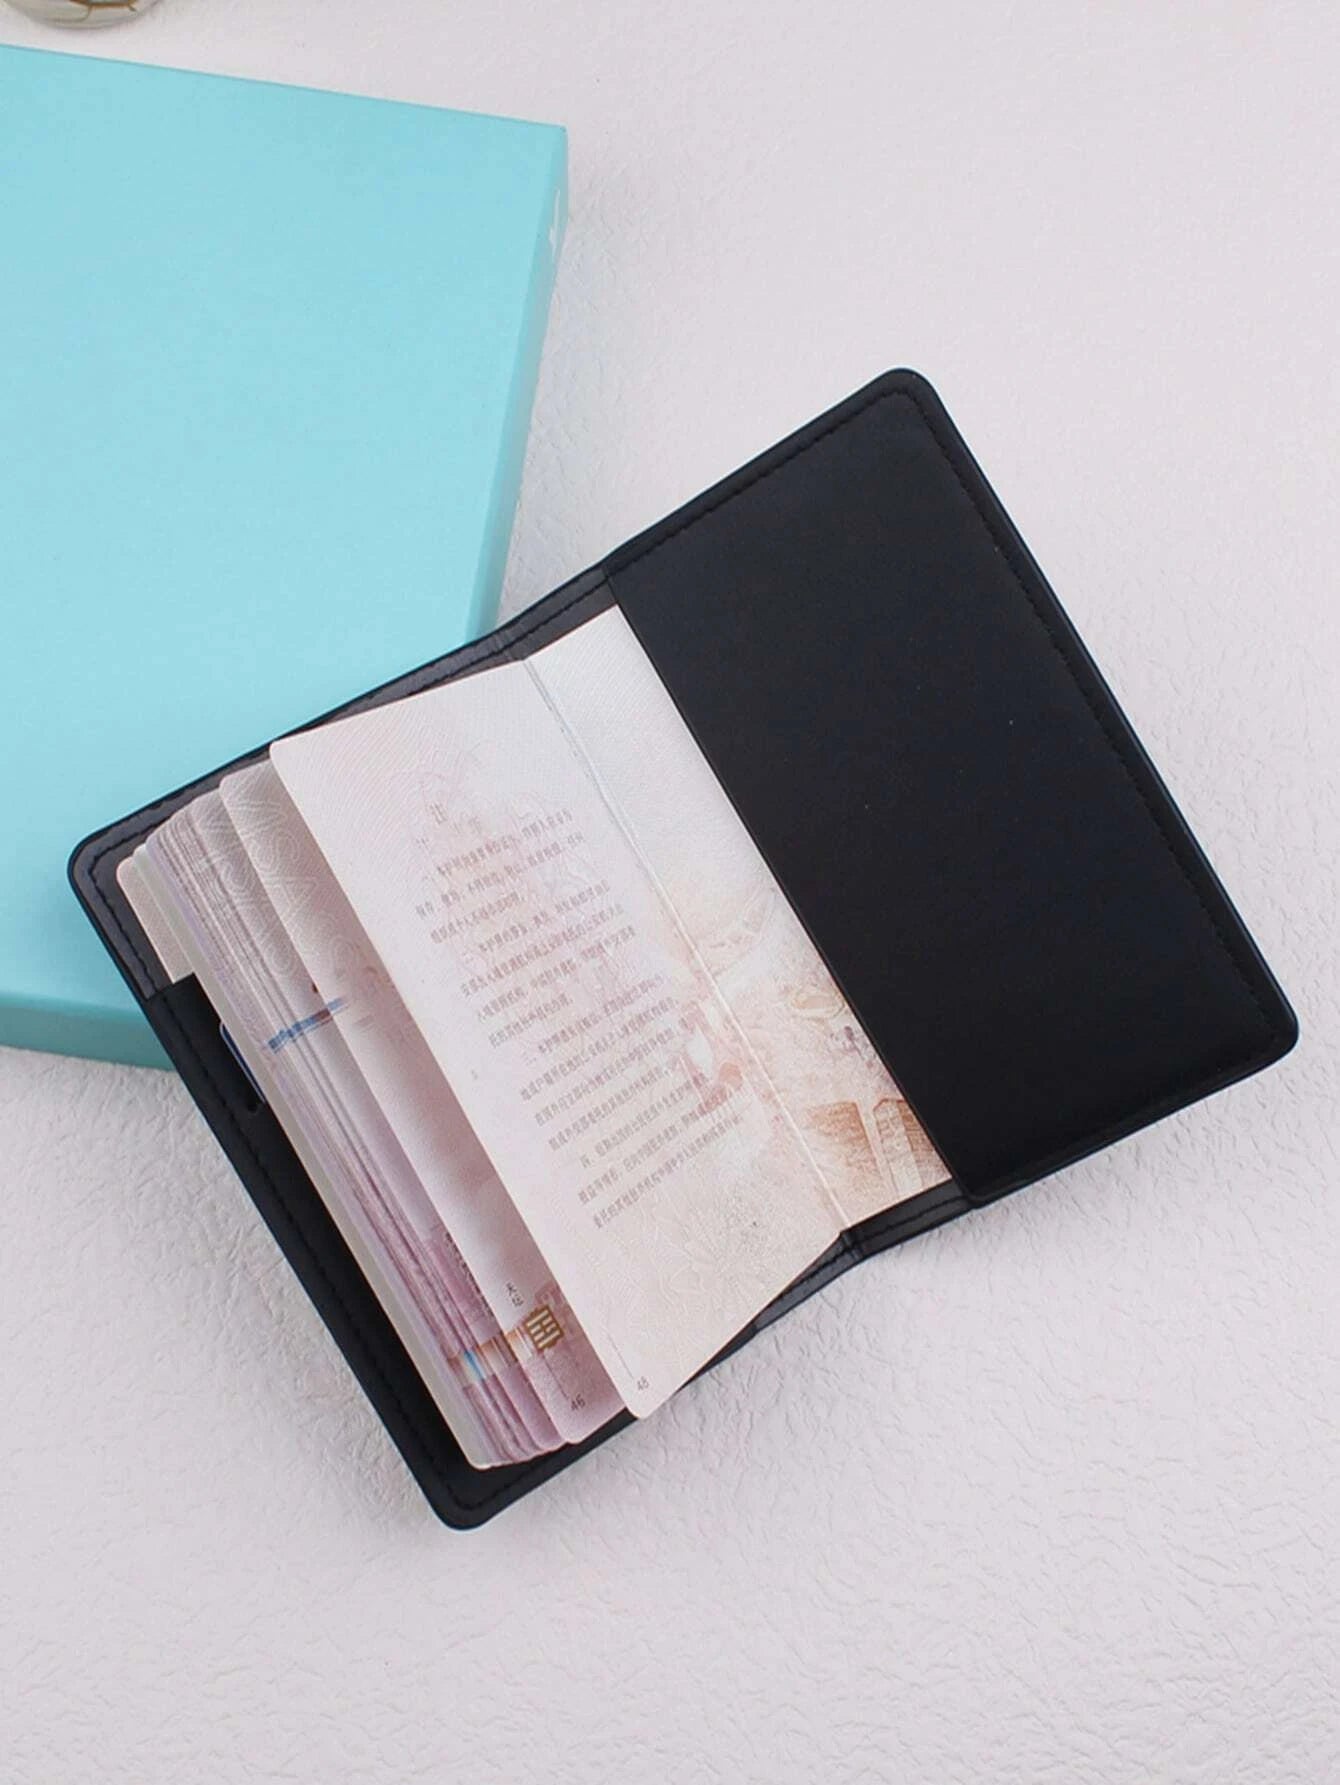 Passport Cover PU Man Women Travel Passport Holder With Credit Card Holder Case Wallet Protector Cover Case